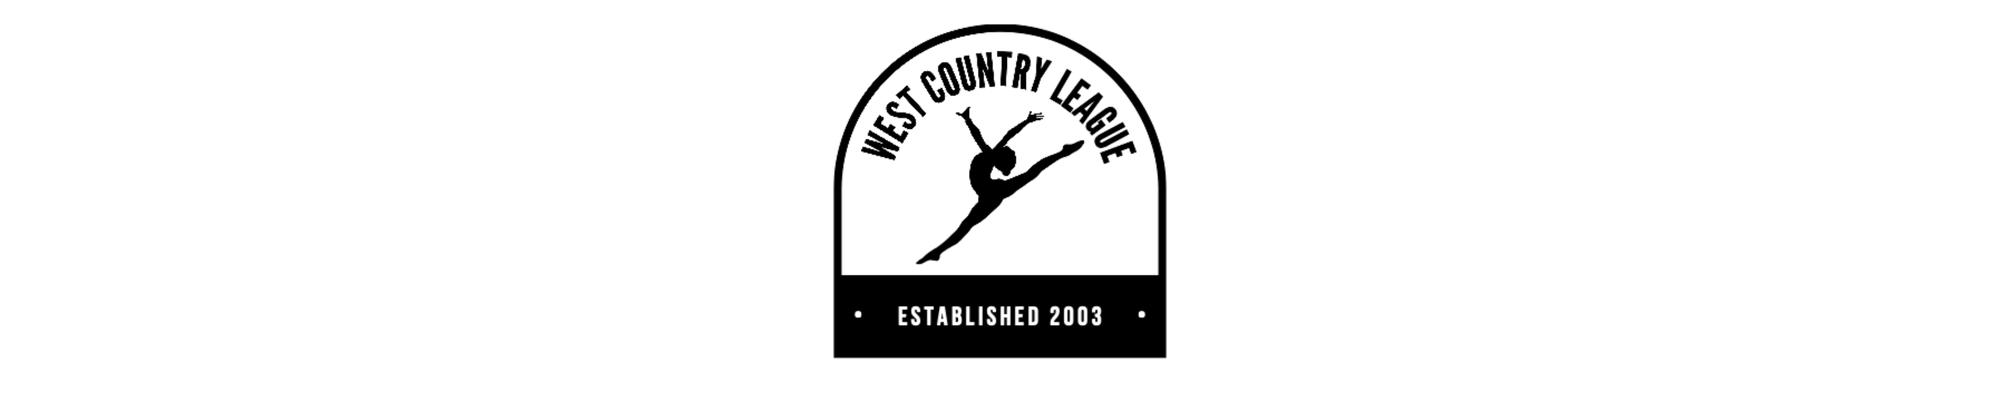 West Country League